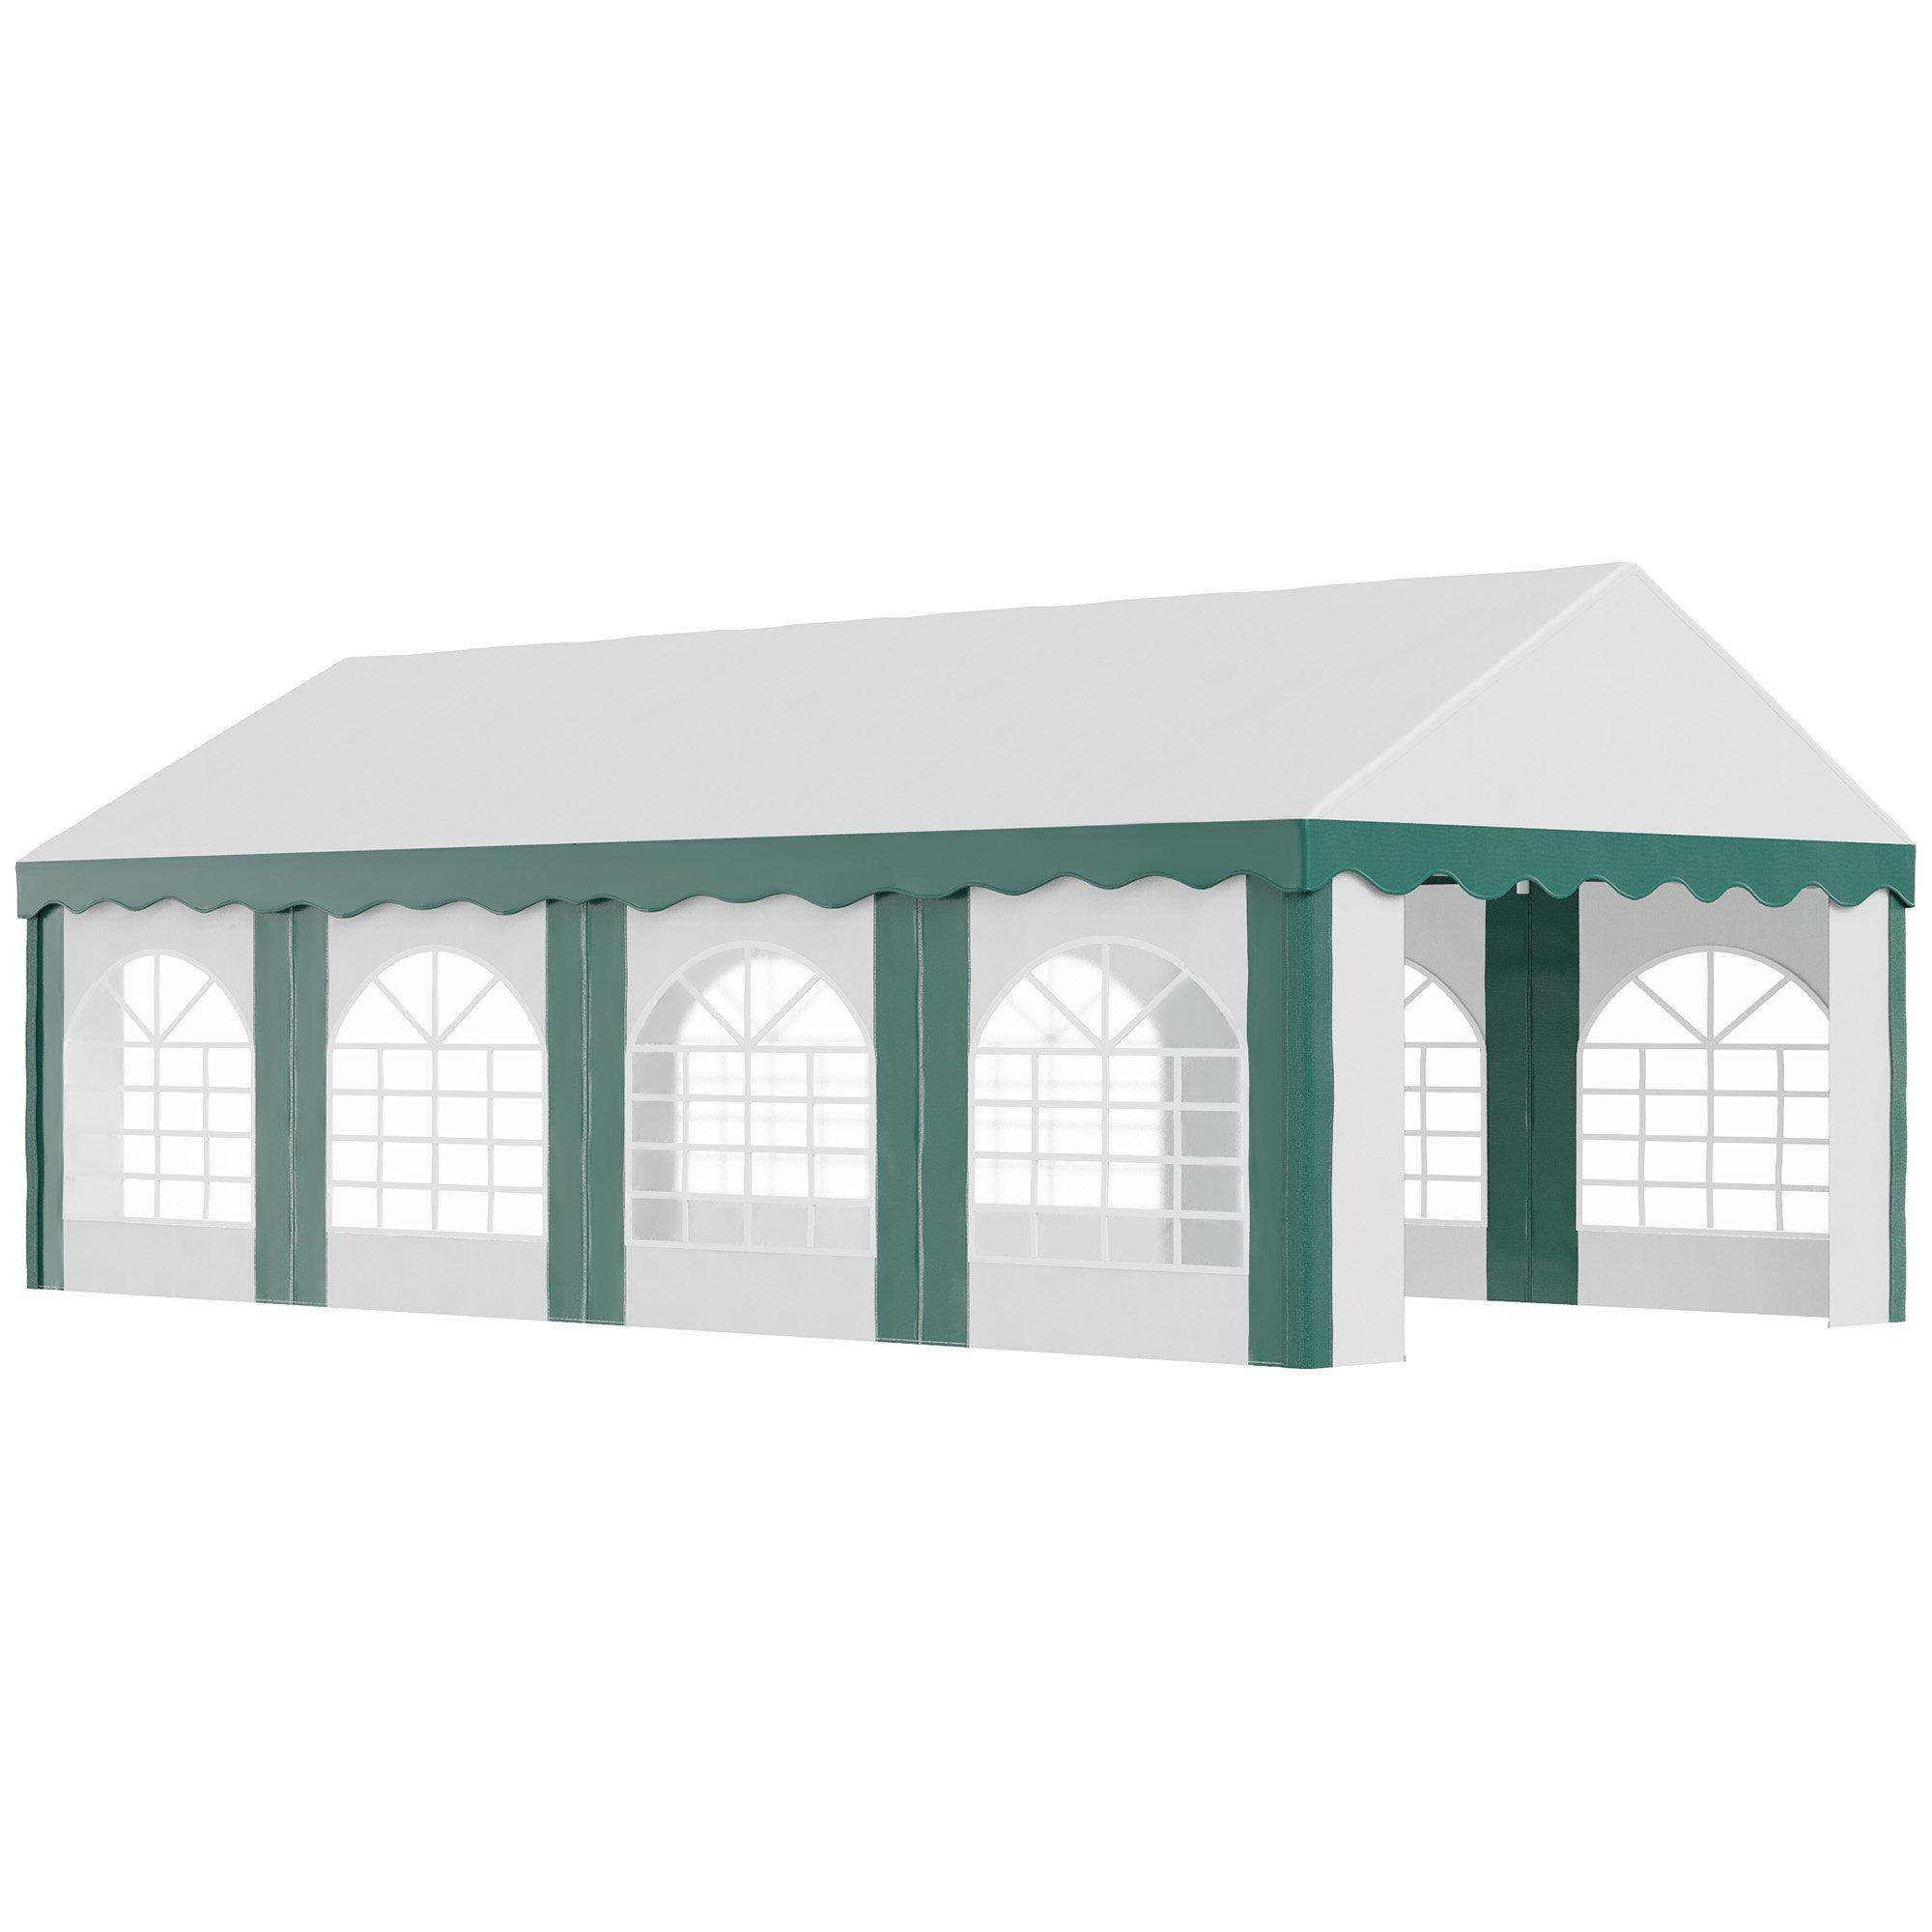 Marquee Gazebo, Party Tent with Sides and Double Doors - image 1